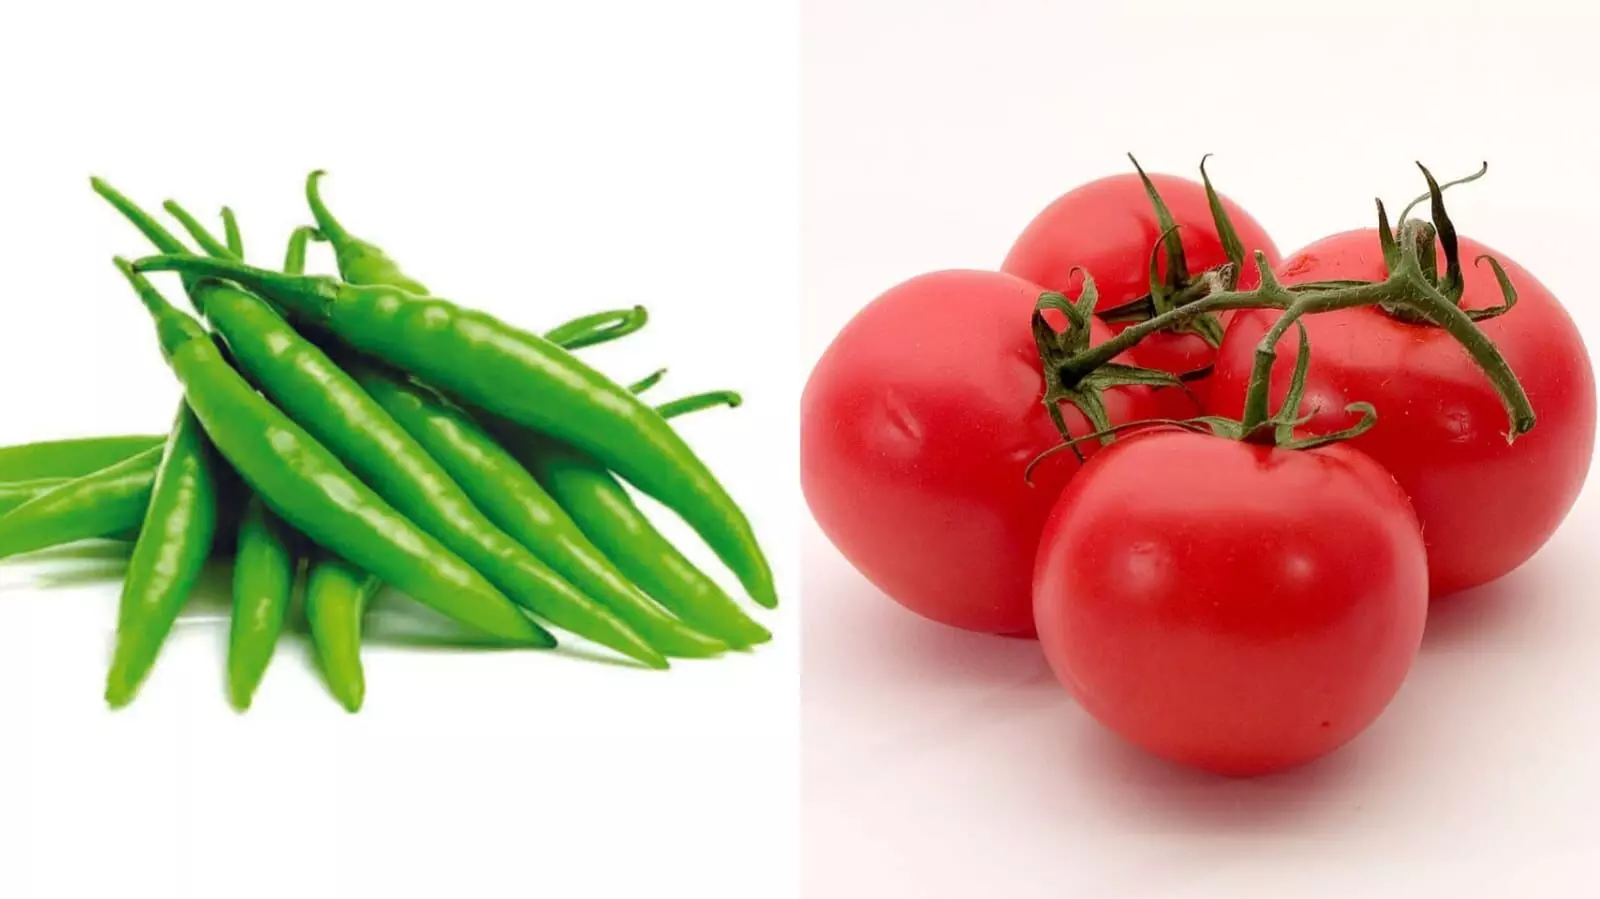 Tomatoes, green chillies price overtakes petrol